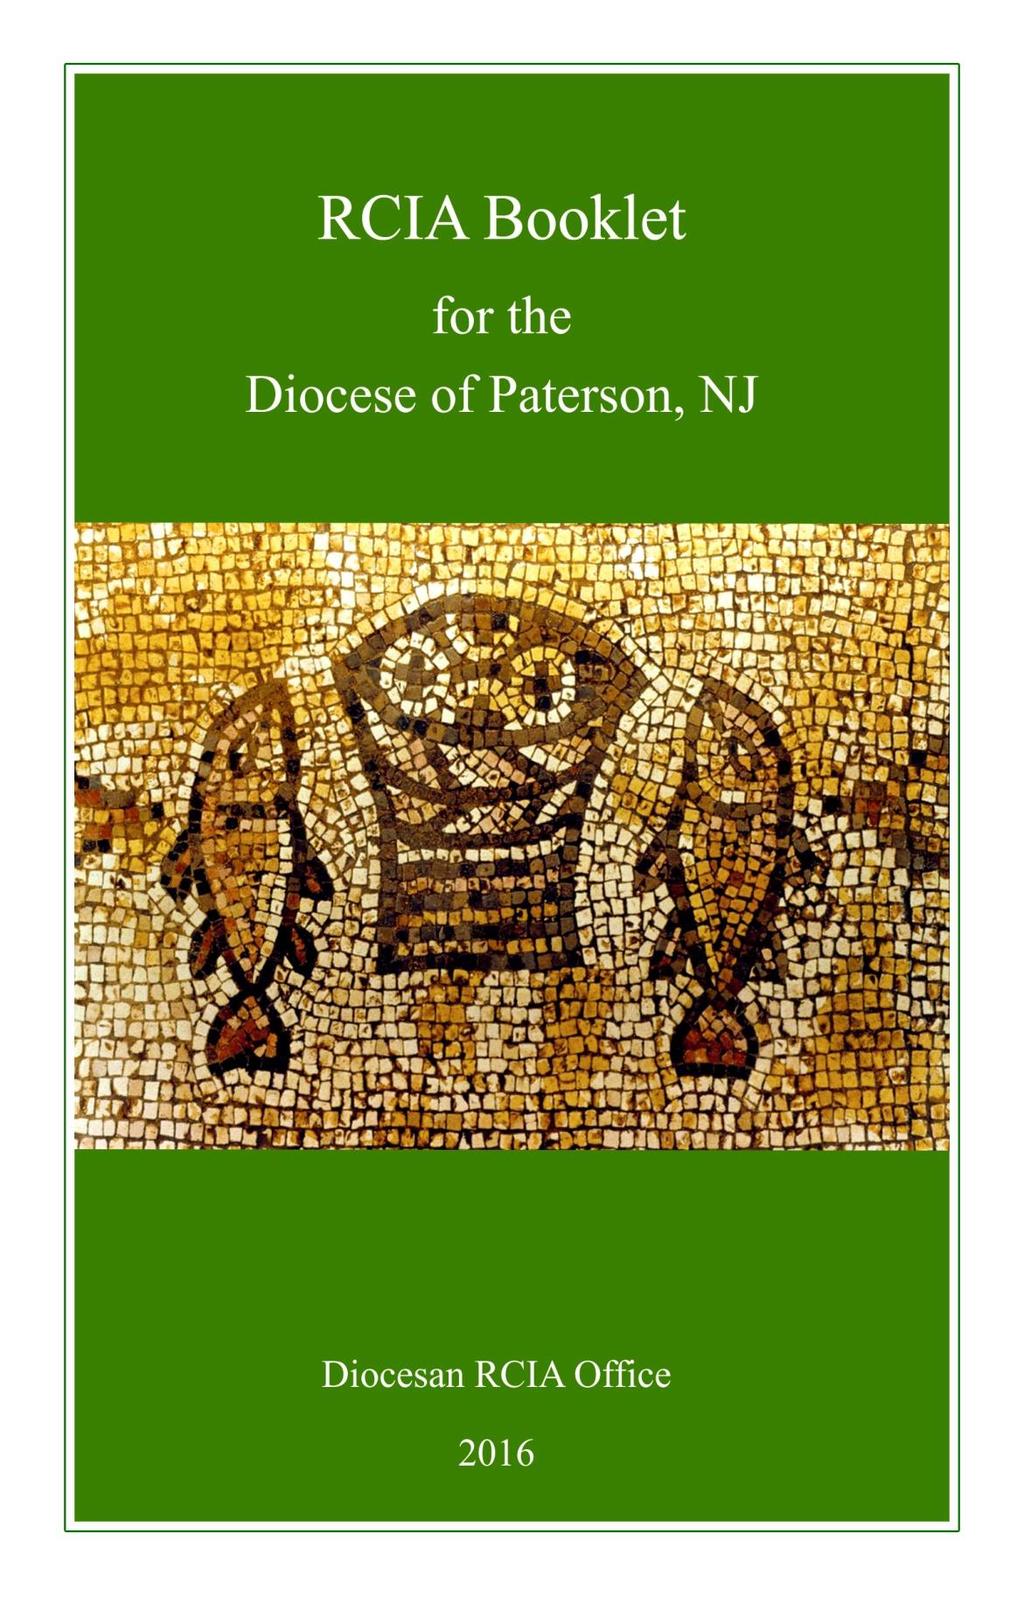 This handbook was designed for the use of the RCIA coordinators in the Diocese of Paterson.